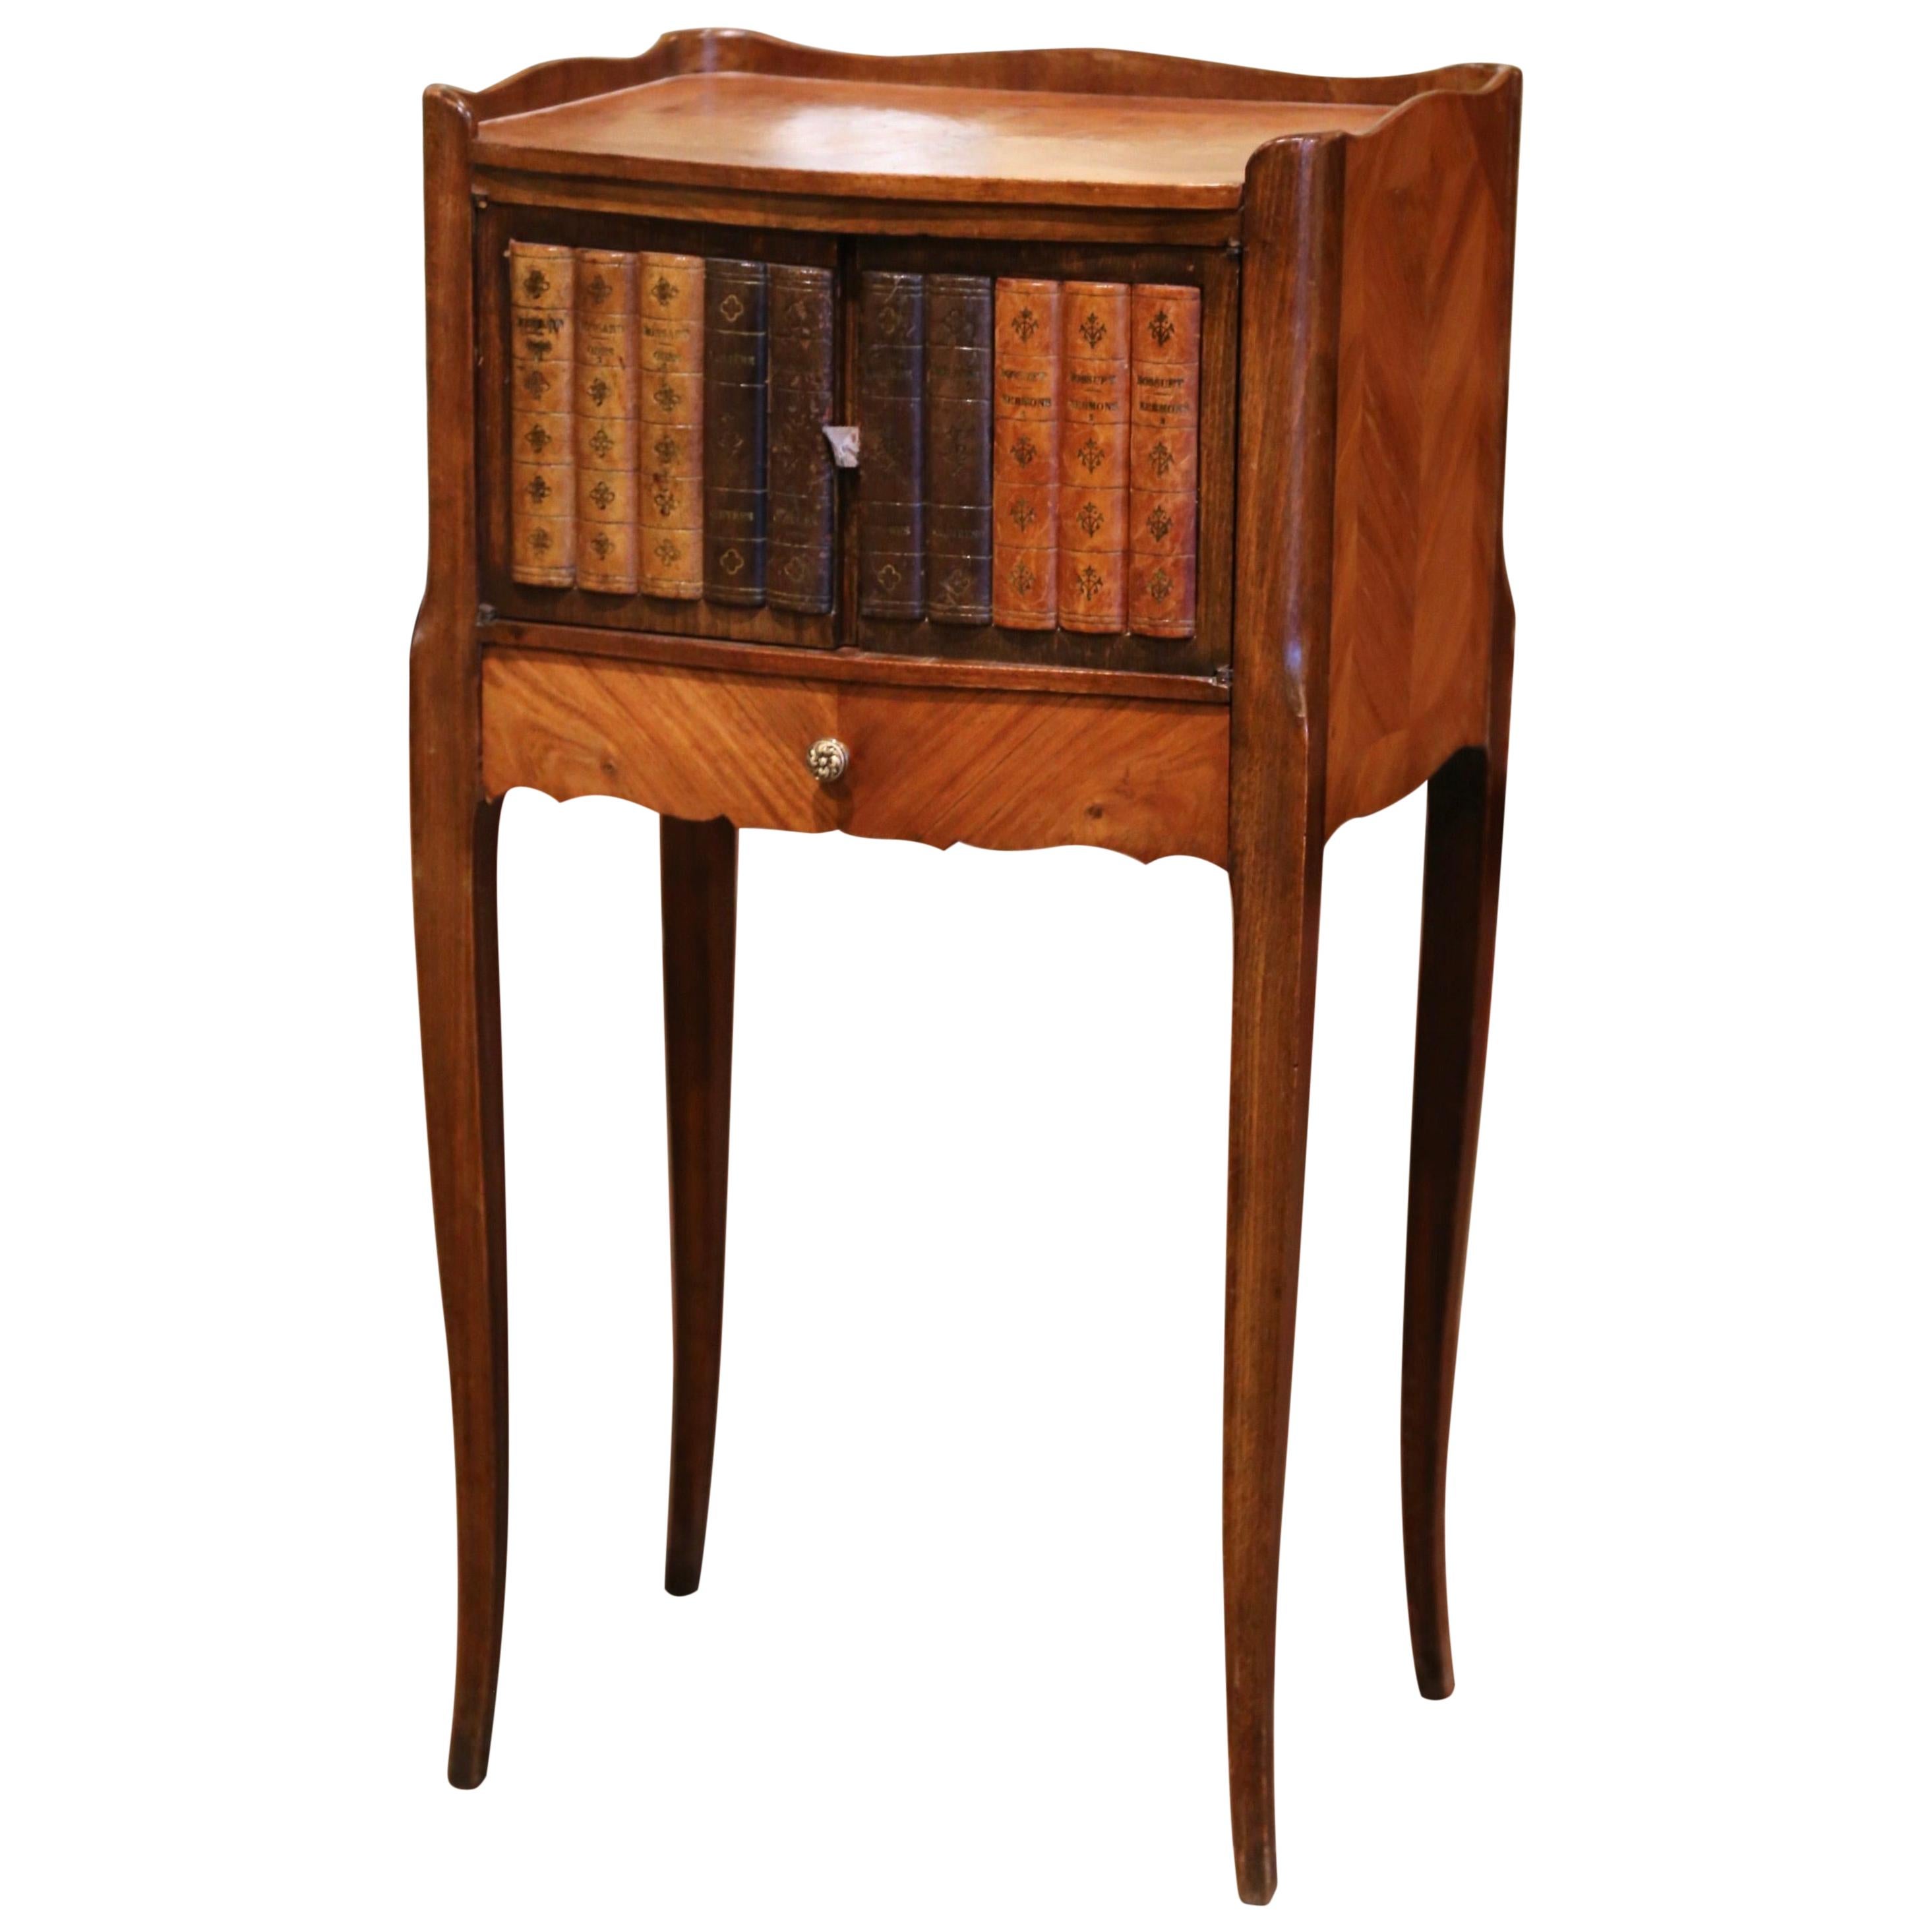 19th Century French Marquetry Walnut Nightstand with "Trompe L'Oeil" Book Door